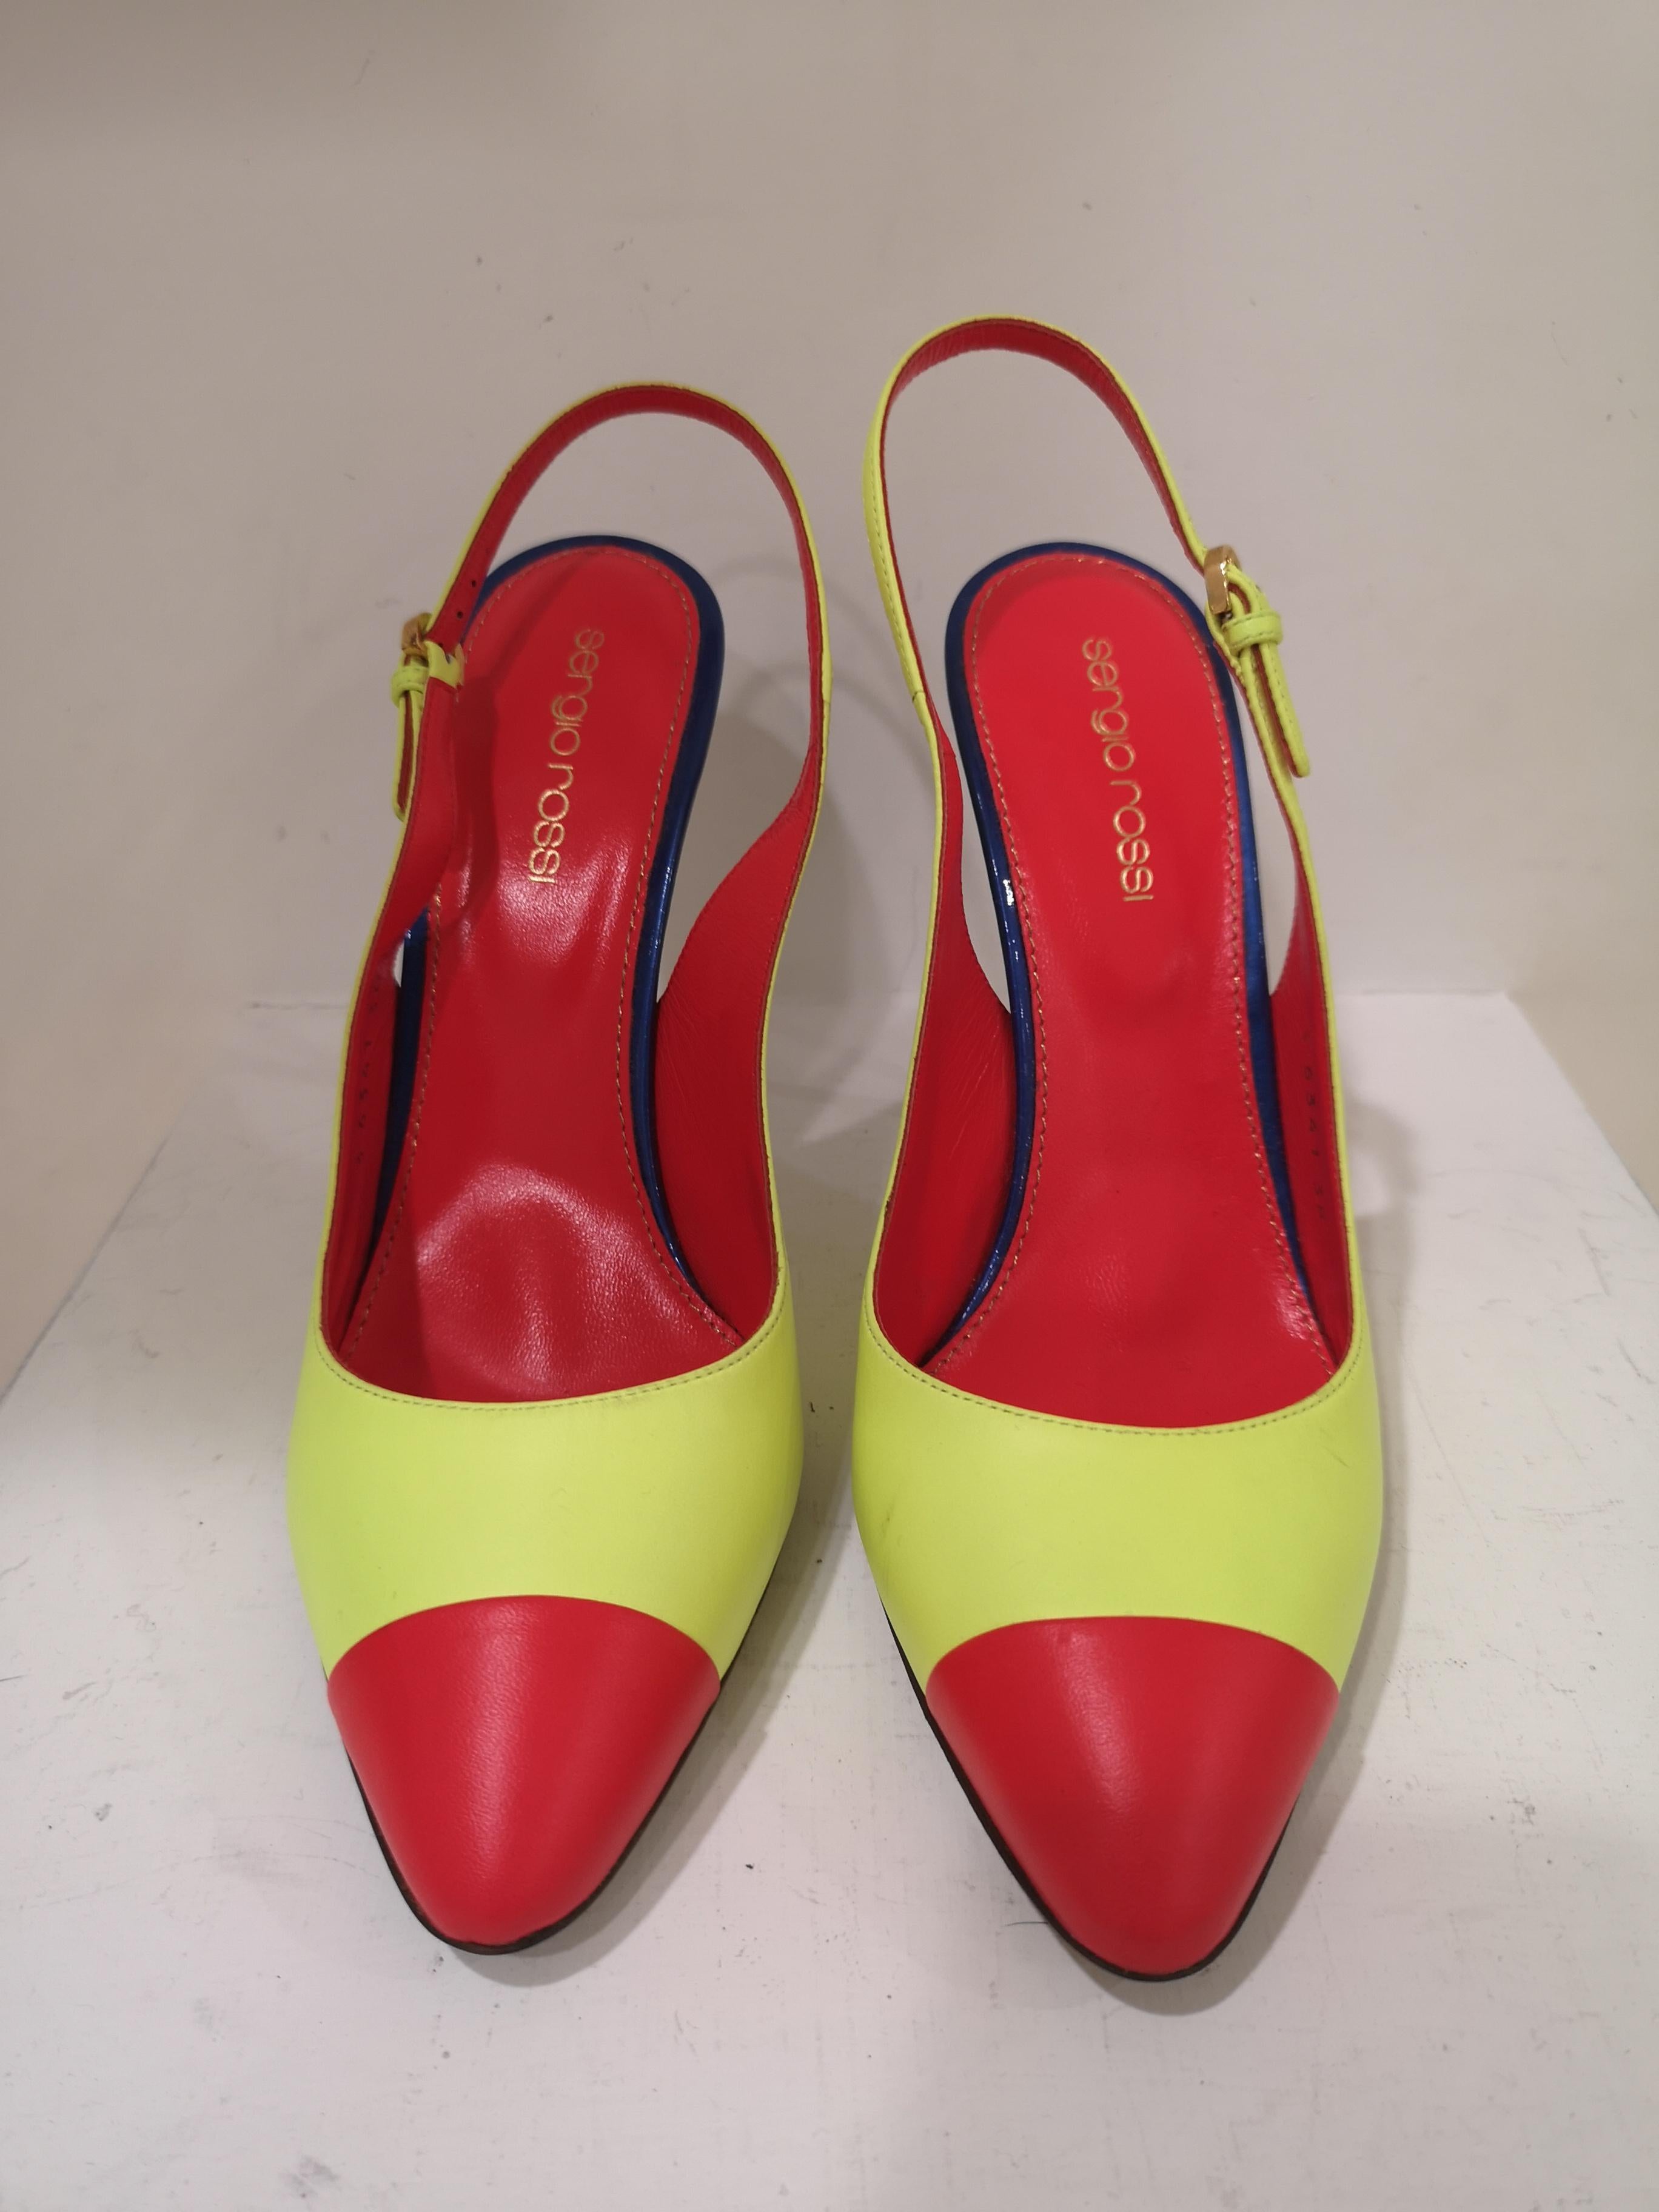 Sergio Rossi Red Blue Fluo Yellow Decollete For Sale 5